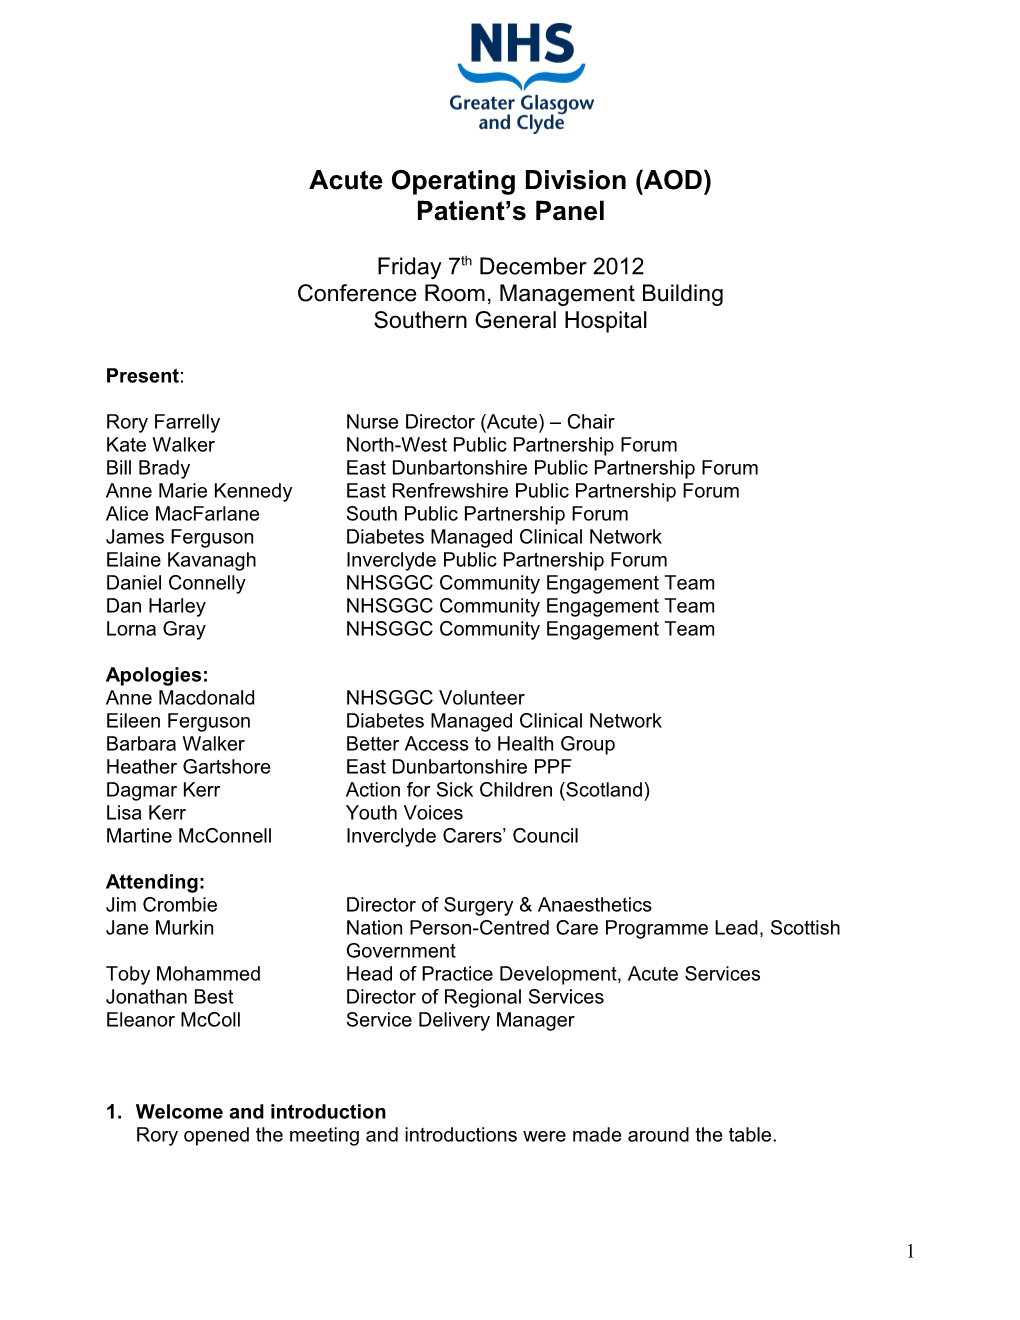 Meeting of the Acute Operating Division Patients Panel